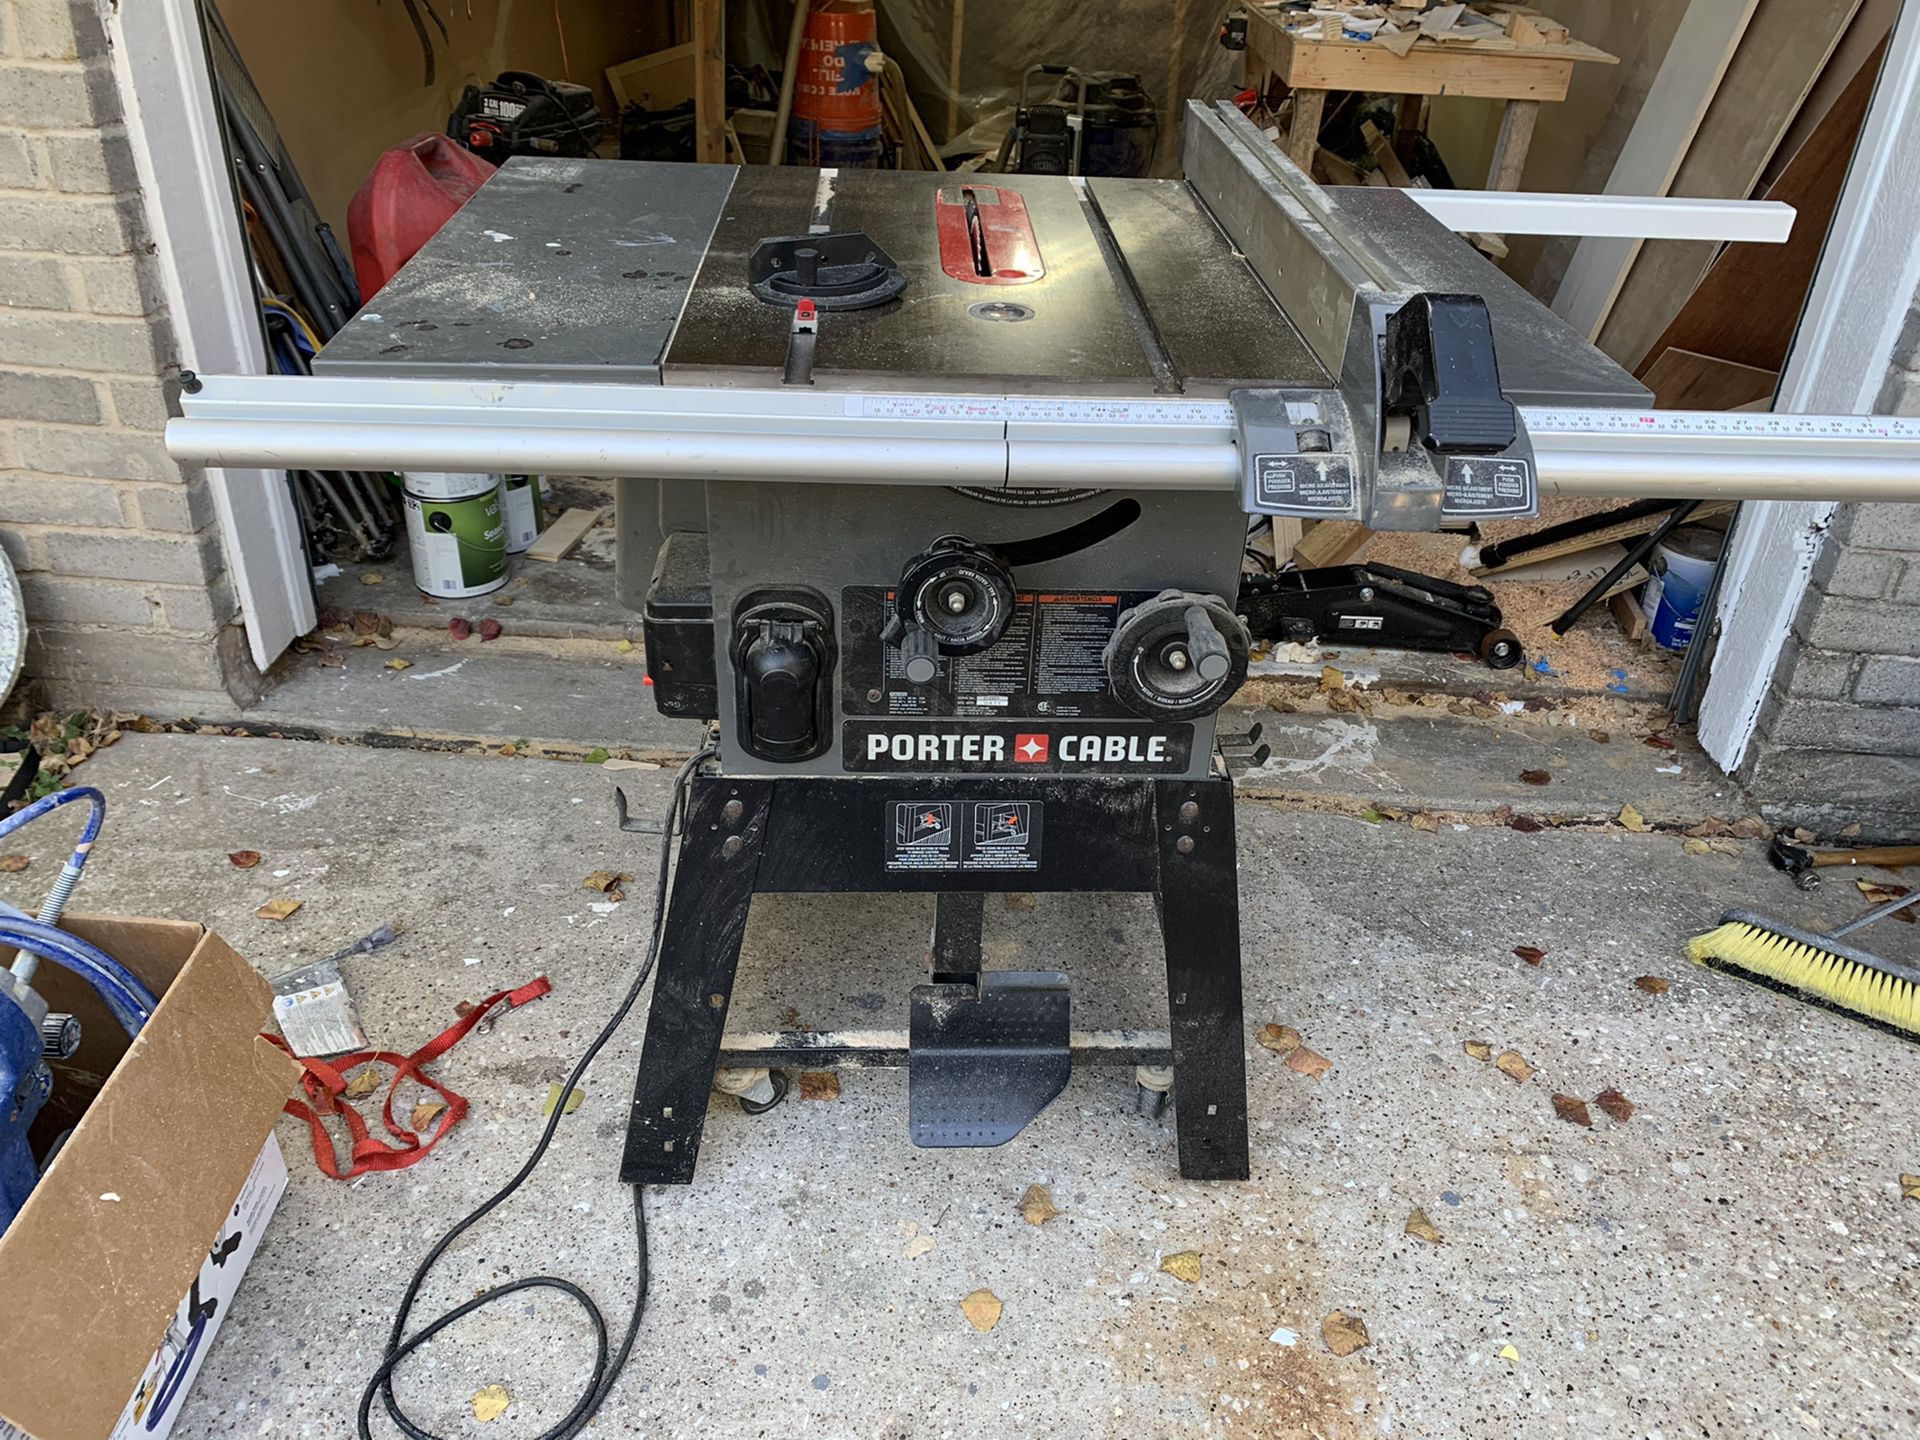 Porter cable table saw